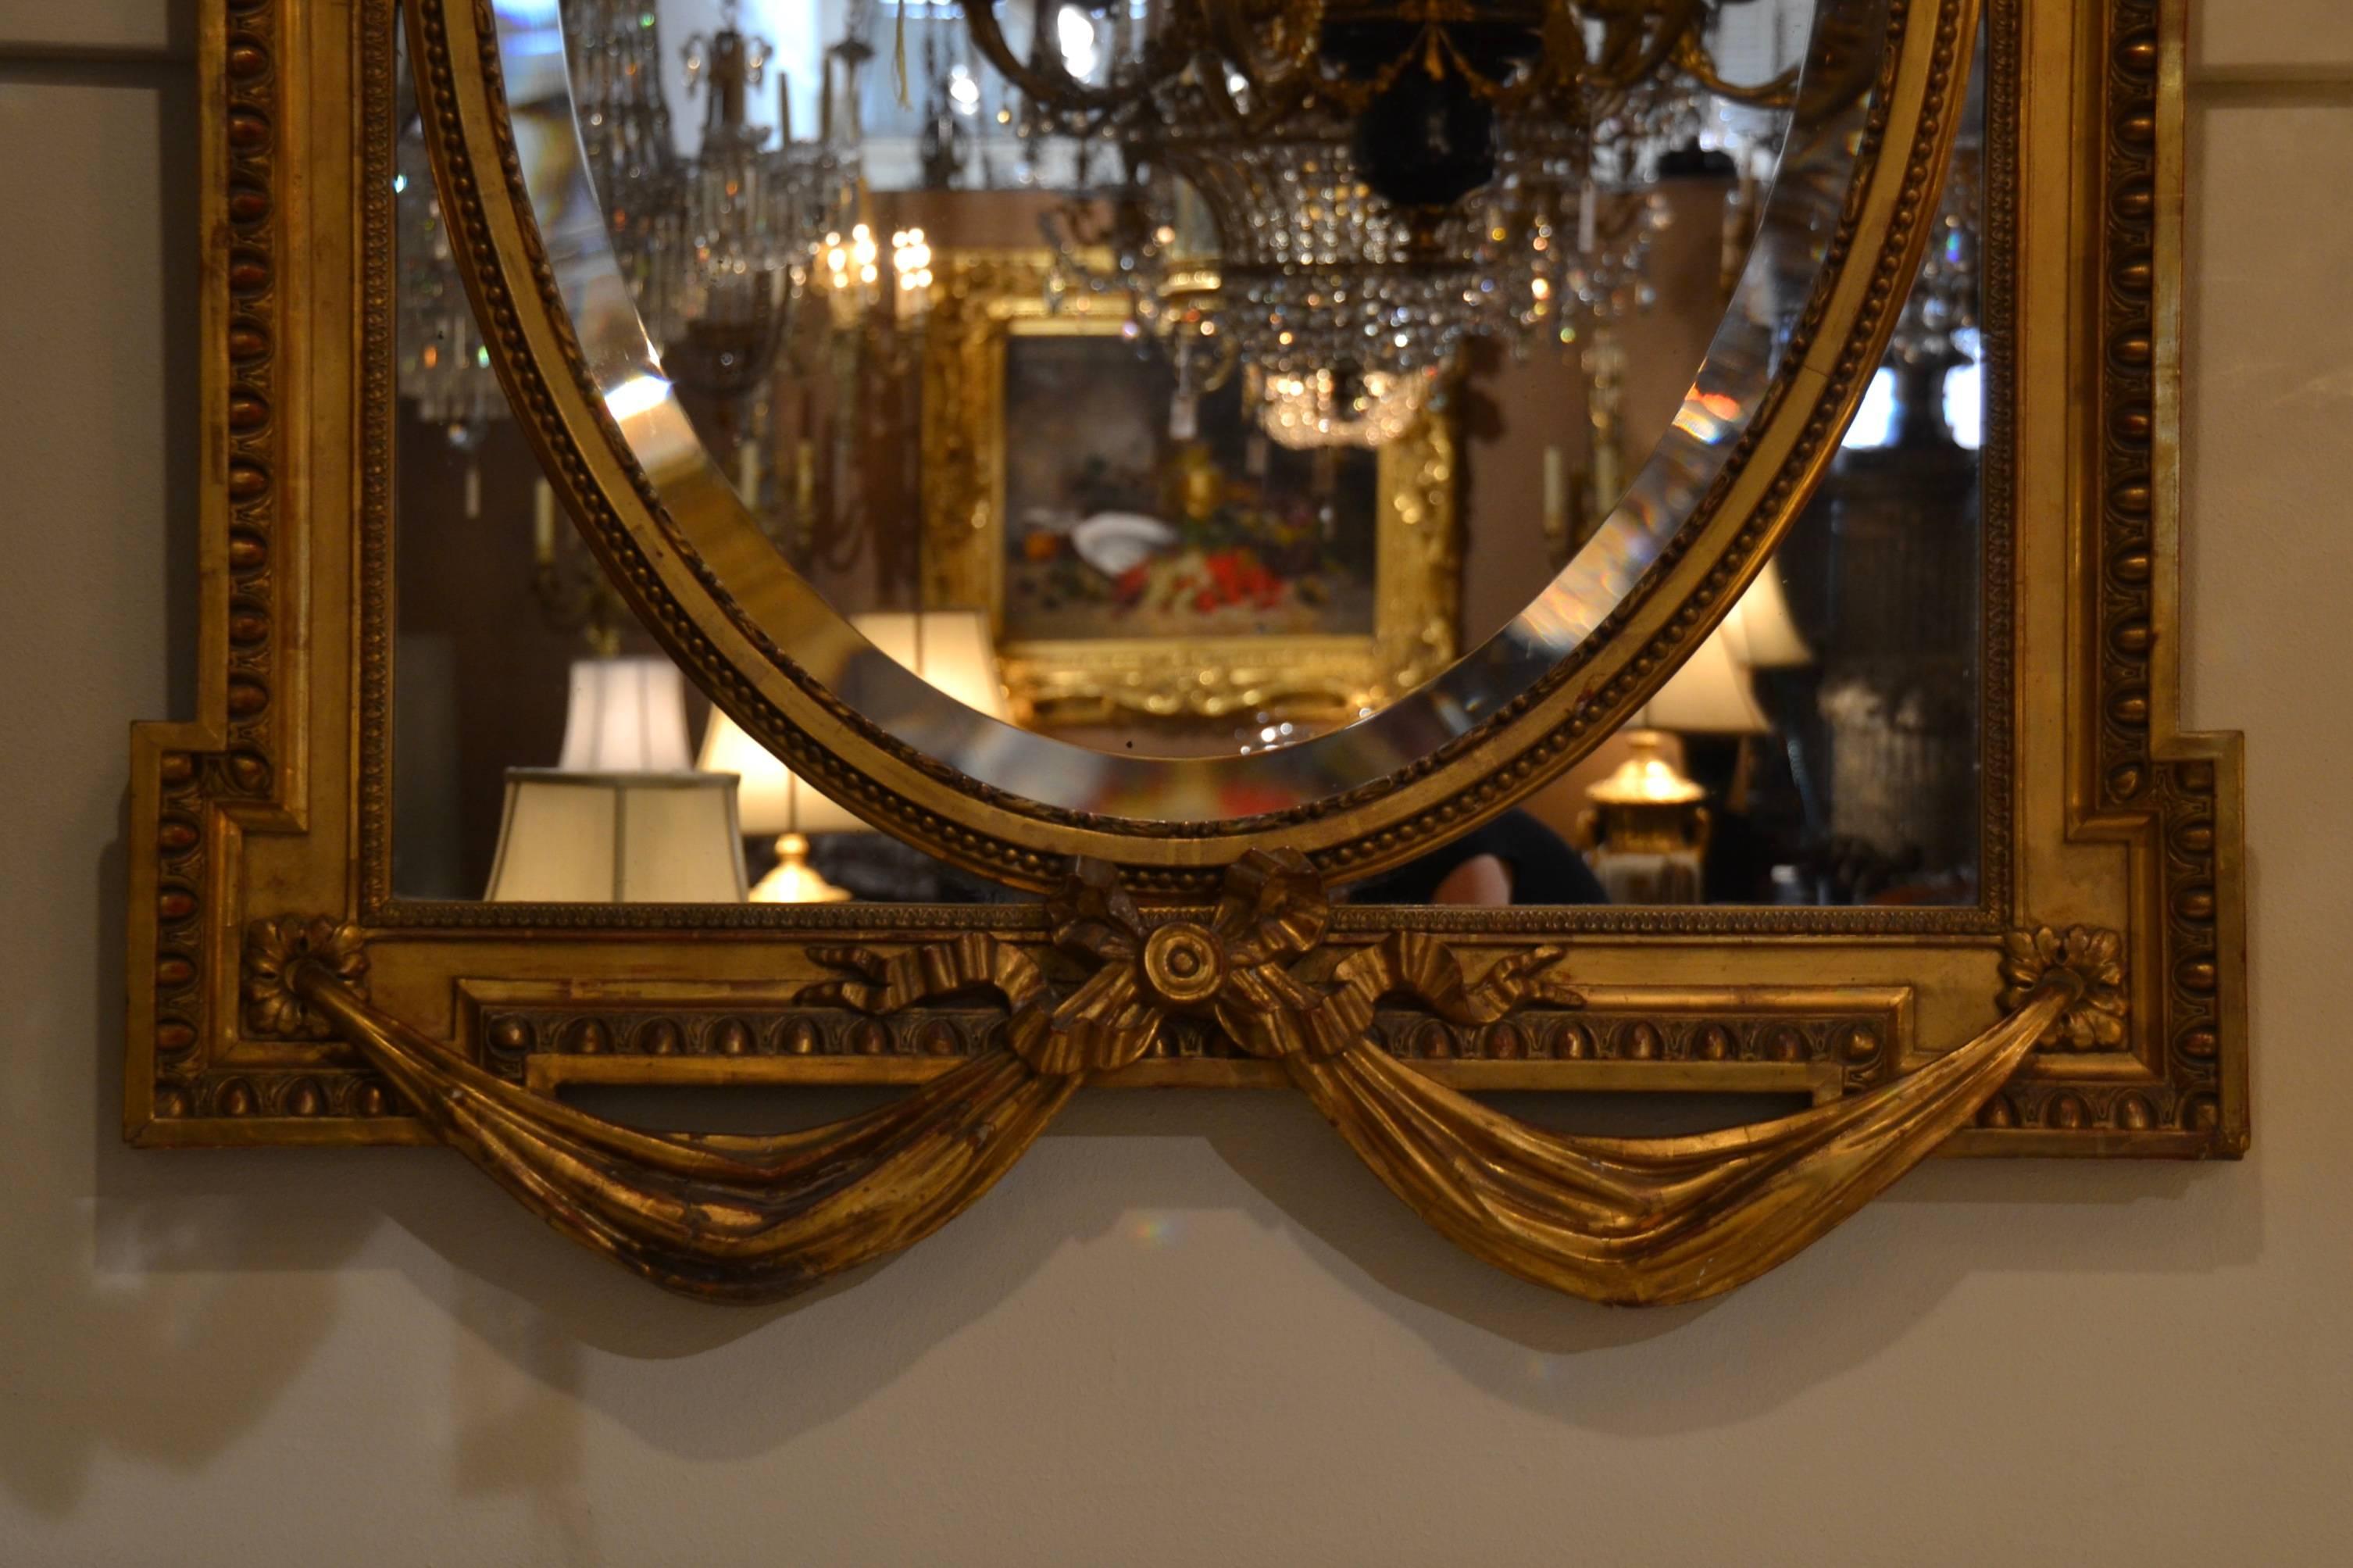 Antique French Louis XVI Gold Paneled Wood Mirror with Deep Beveling, circa 1860 In Excellent Condition For Sale In New Orleans, LA